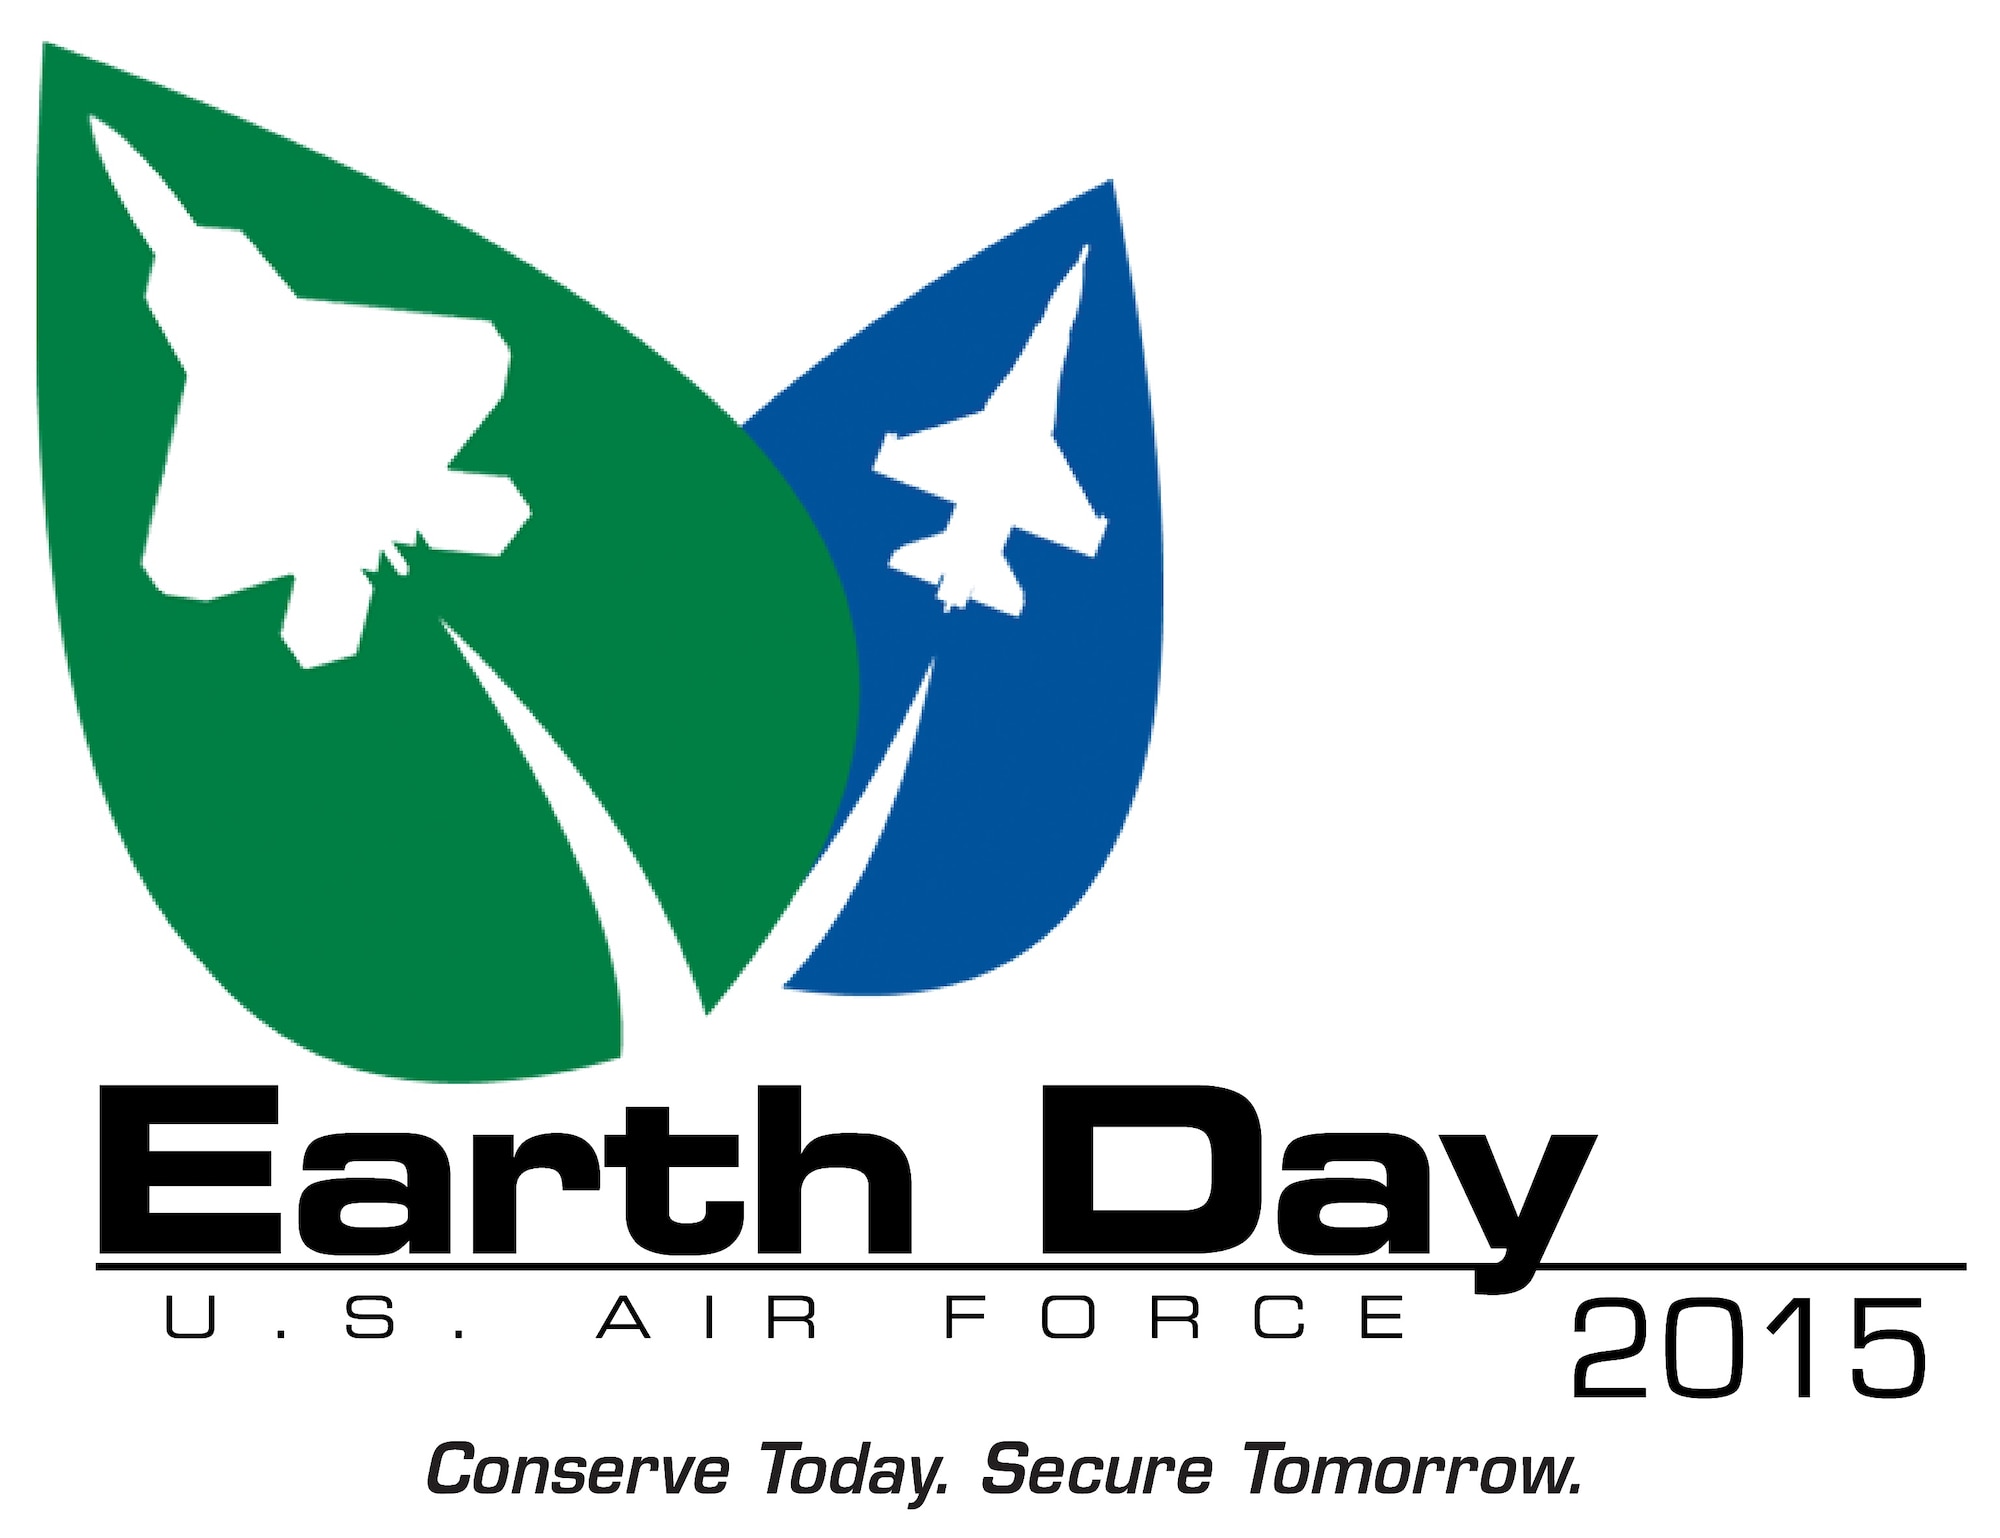 As the nation celebrates the 45th annual Earth Day April 22, the Air Force is re-emphasizing its long-standing commitment to environmental stewardship and encouraging its military and civilian workforce to promote recycling at home and on the job. Installations worldwide are taking action to meet the Defense Department’s Strategic Sustainability Performance Plan goal of diverting 55 percent of non-hazardous solid waste and 100 percent of electronics waste this fiscal year and beyond. (Courtesy graphic)